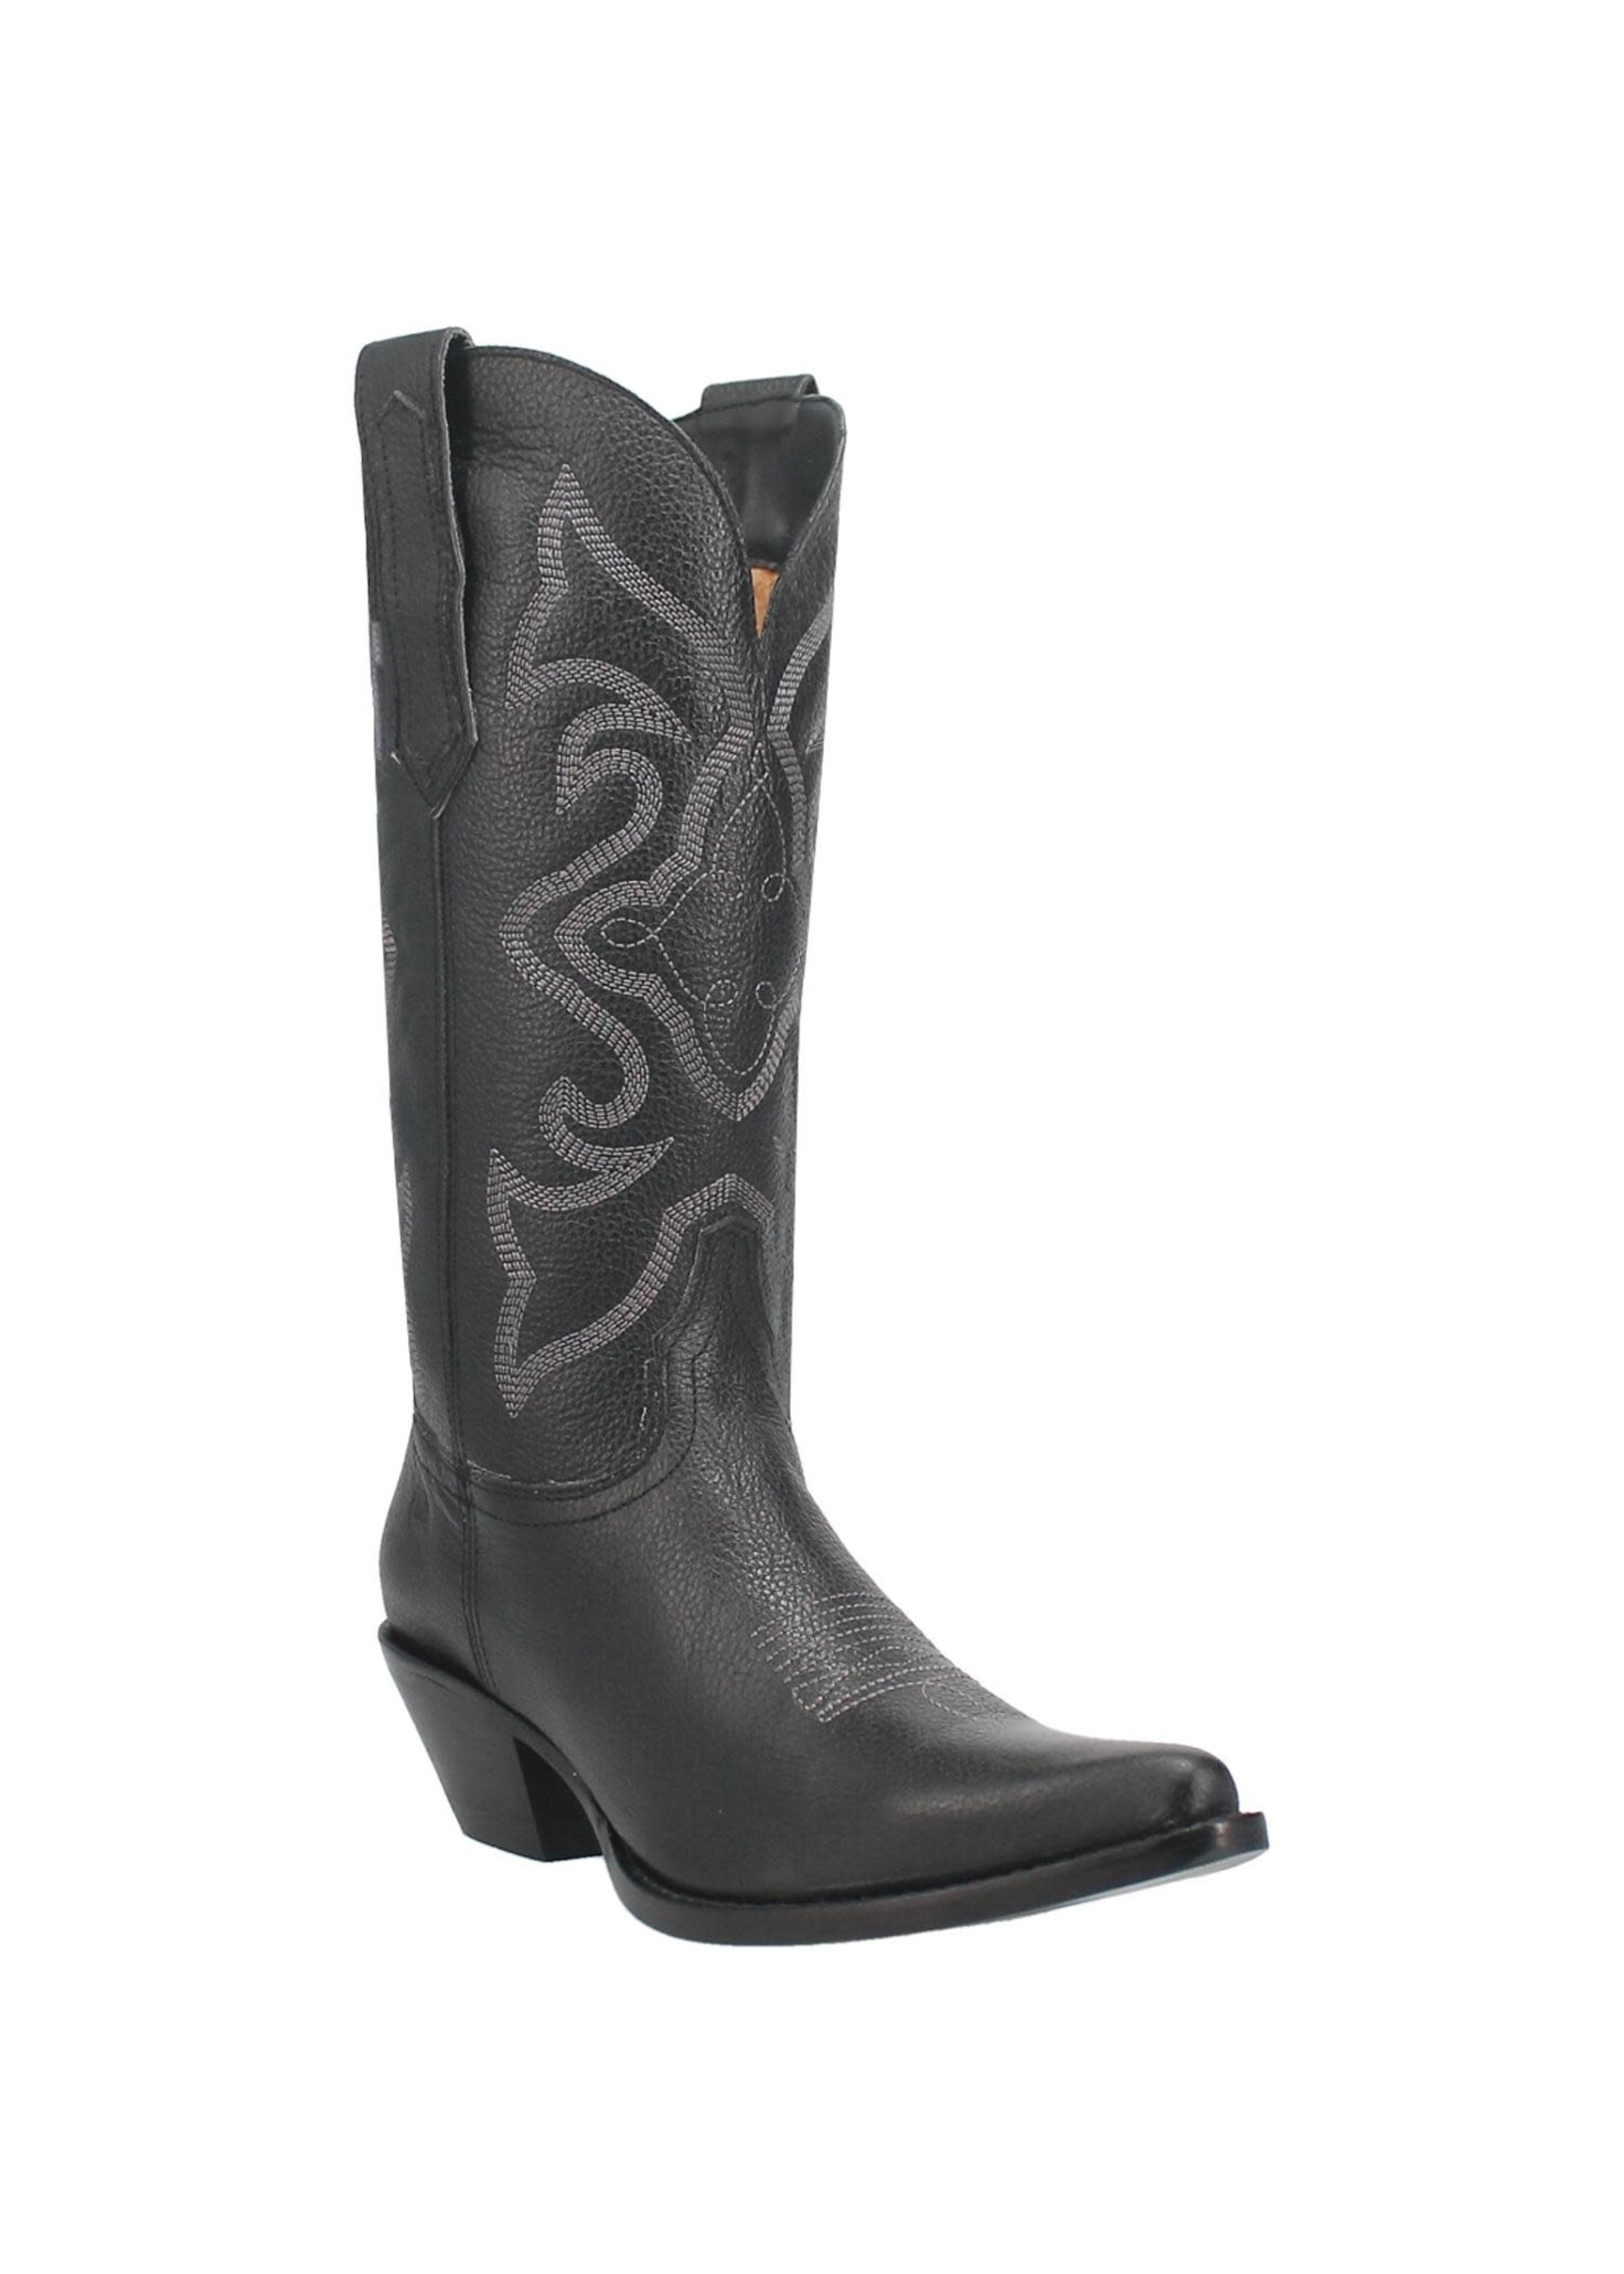 DI920 - Out West Smooth Black - Circle B Western Wear